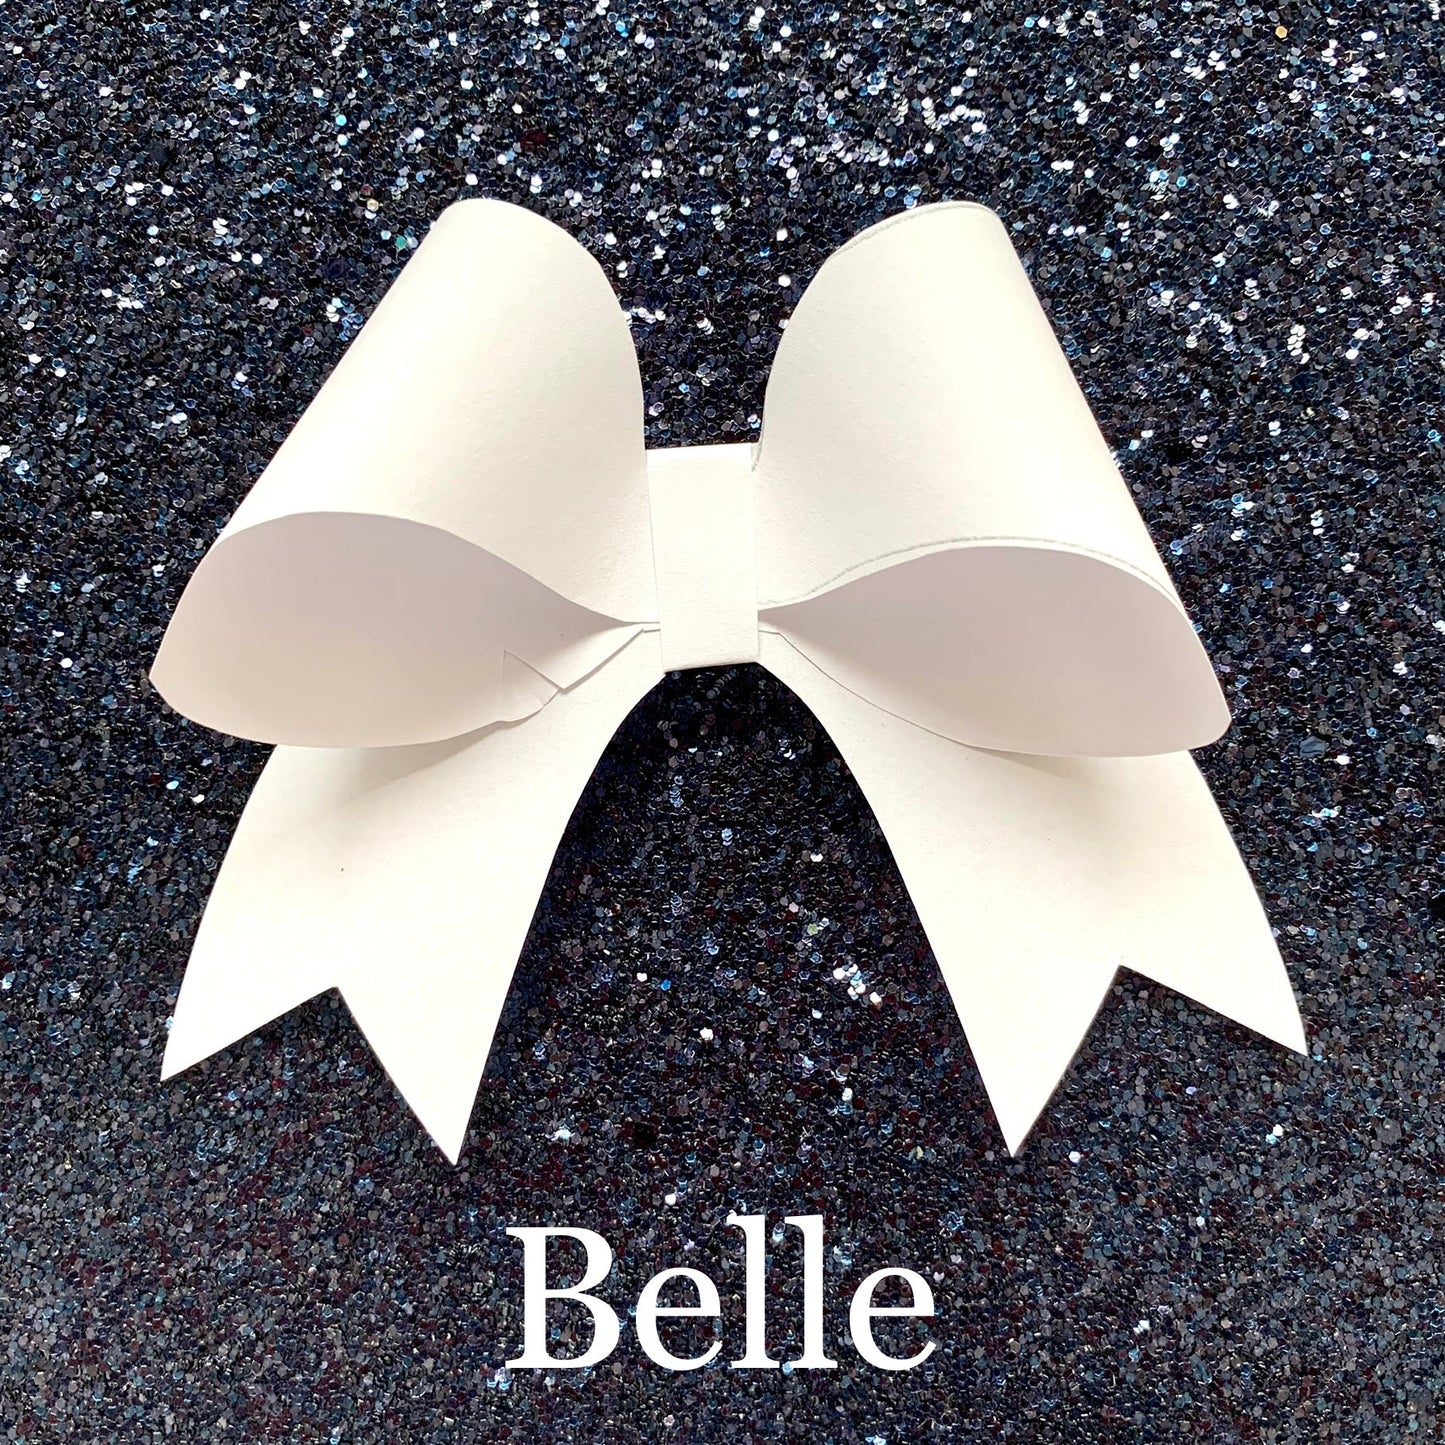 Belle Bow Templates for making hair bows